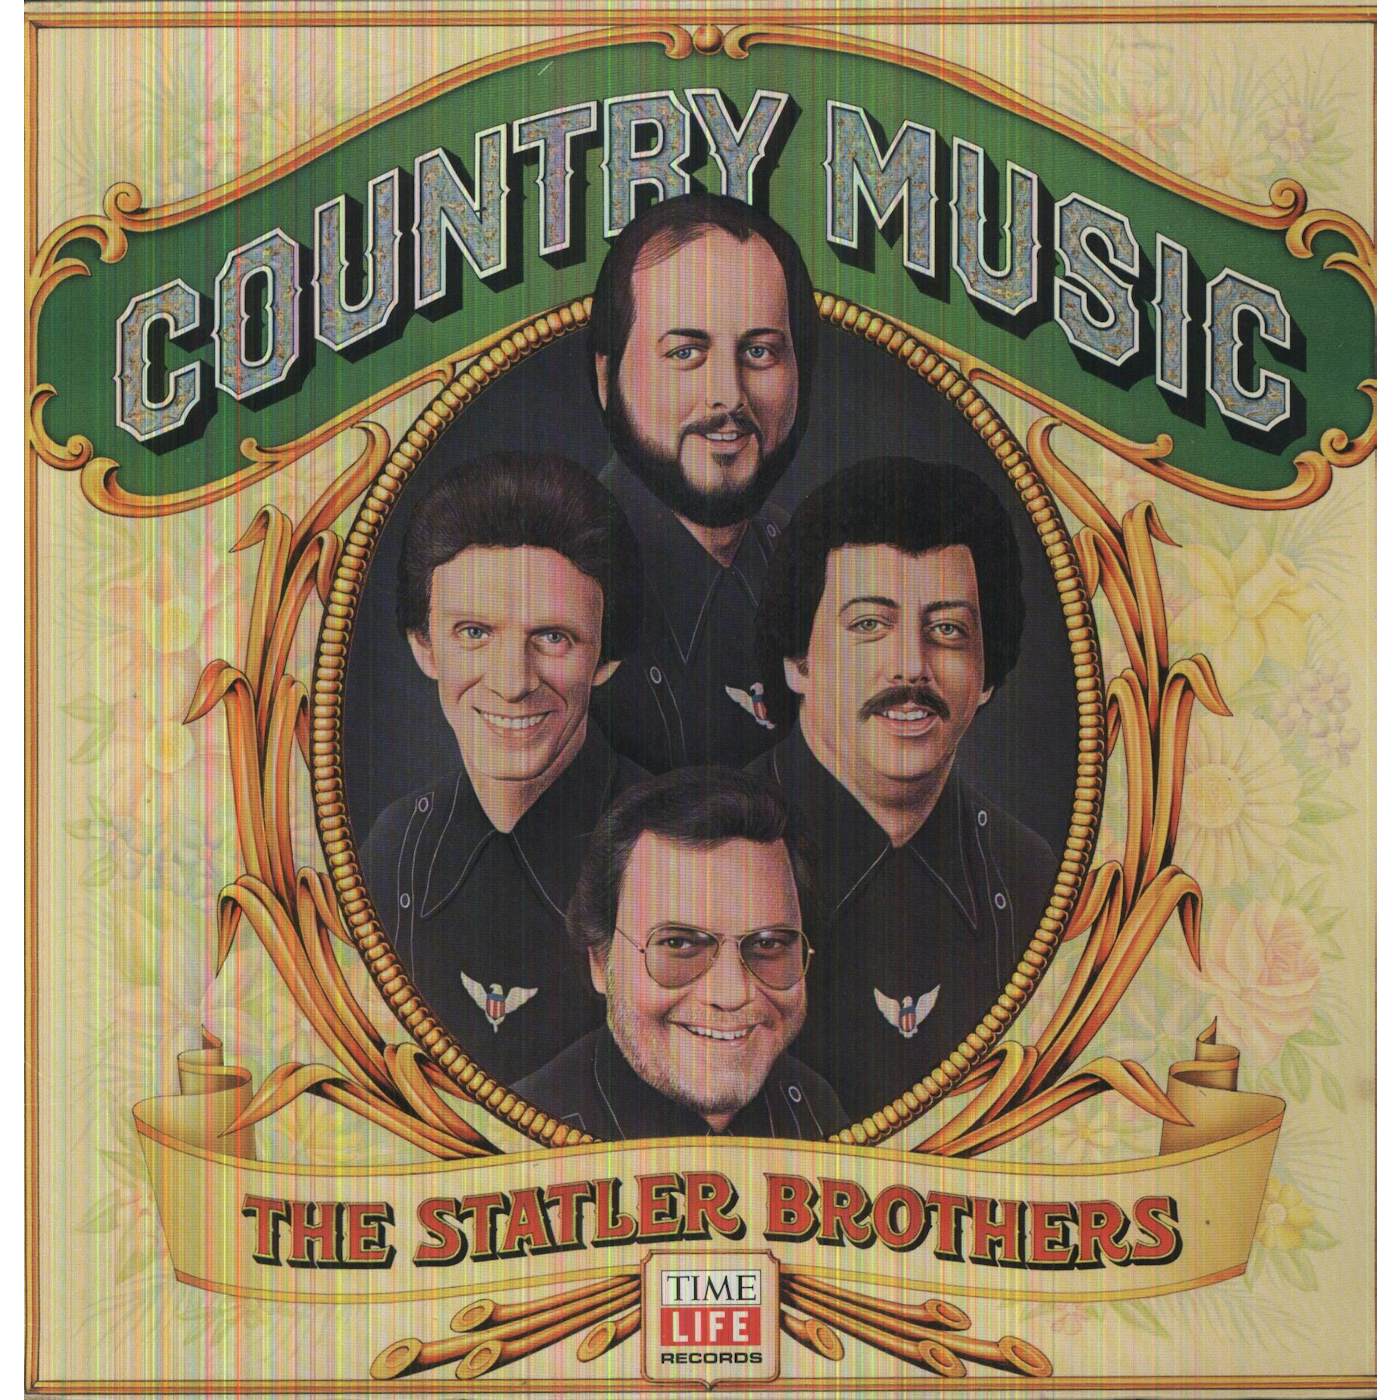 The Statler Brothers COUNTRY MUSIC (FLOWERS ON THE WALL) Vinyl Record